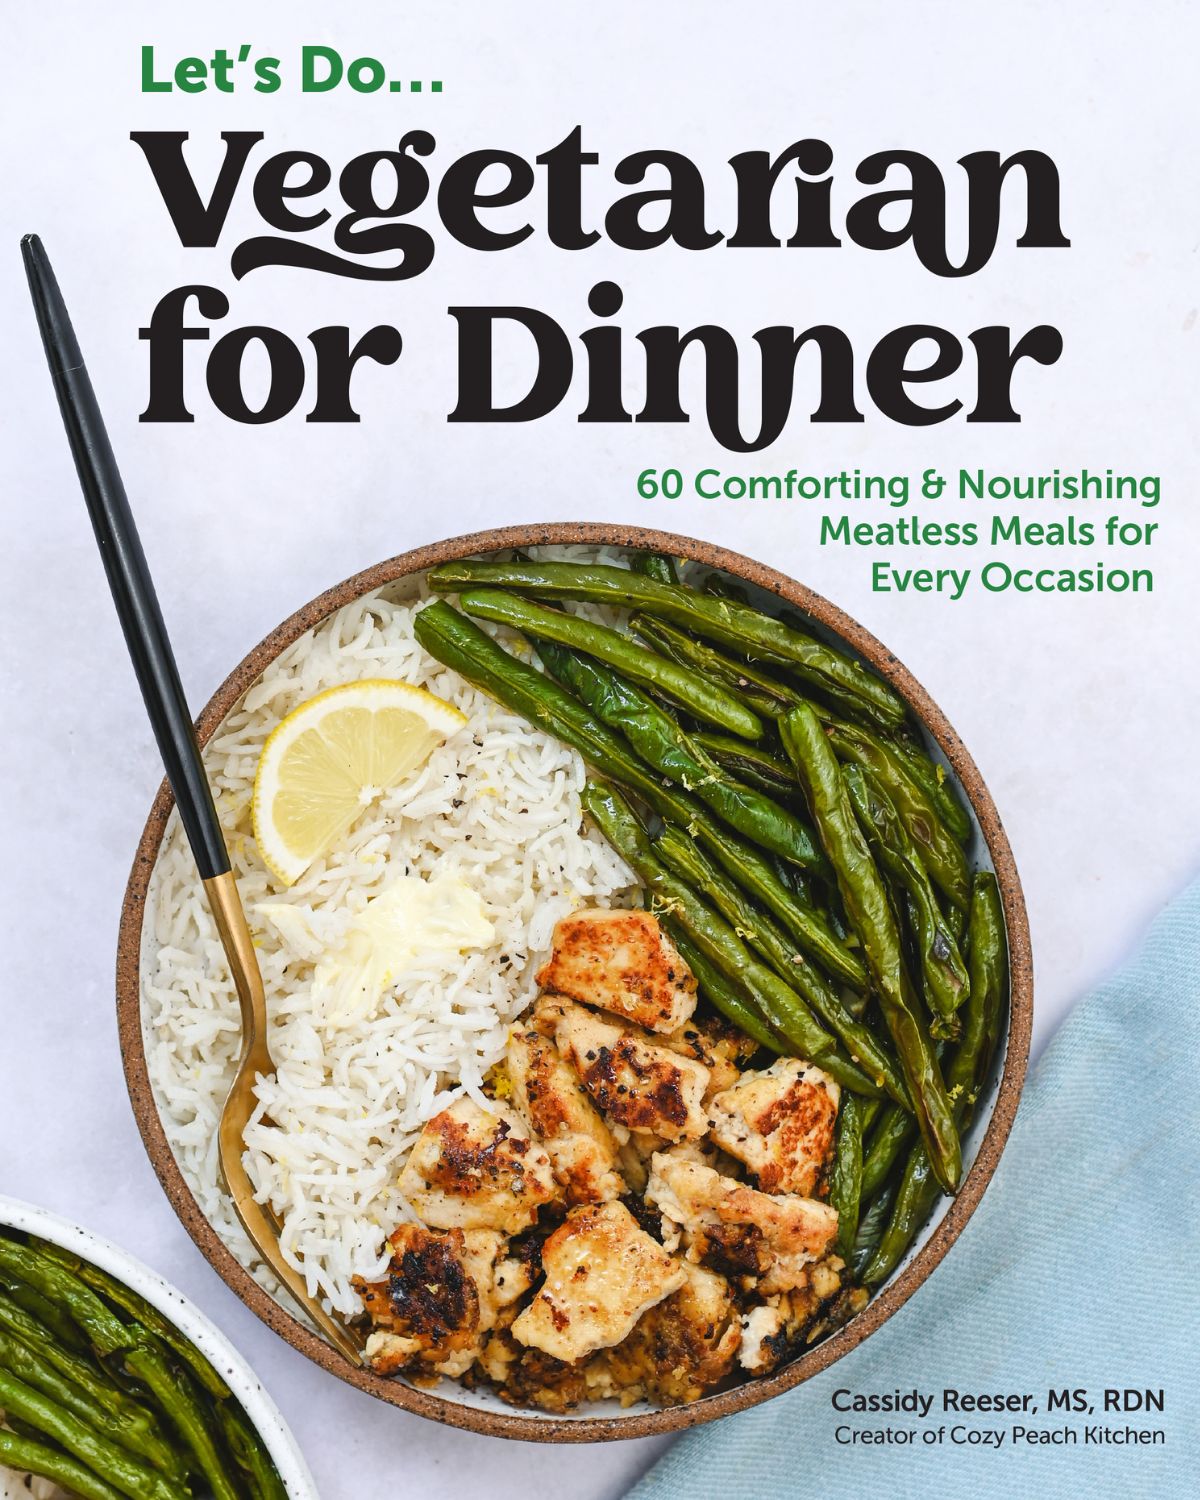 Cookbook cover showing a bowl with tofu, green beans, rice, with text reading "Vegetarian for Dinner" and book description.